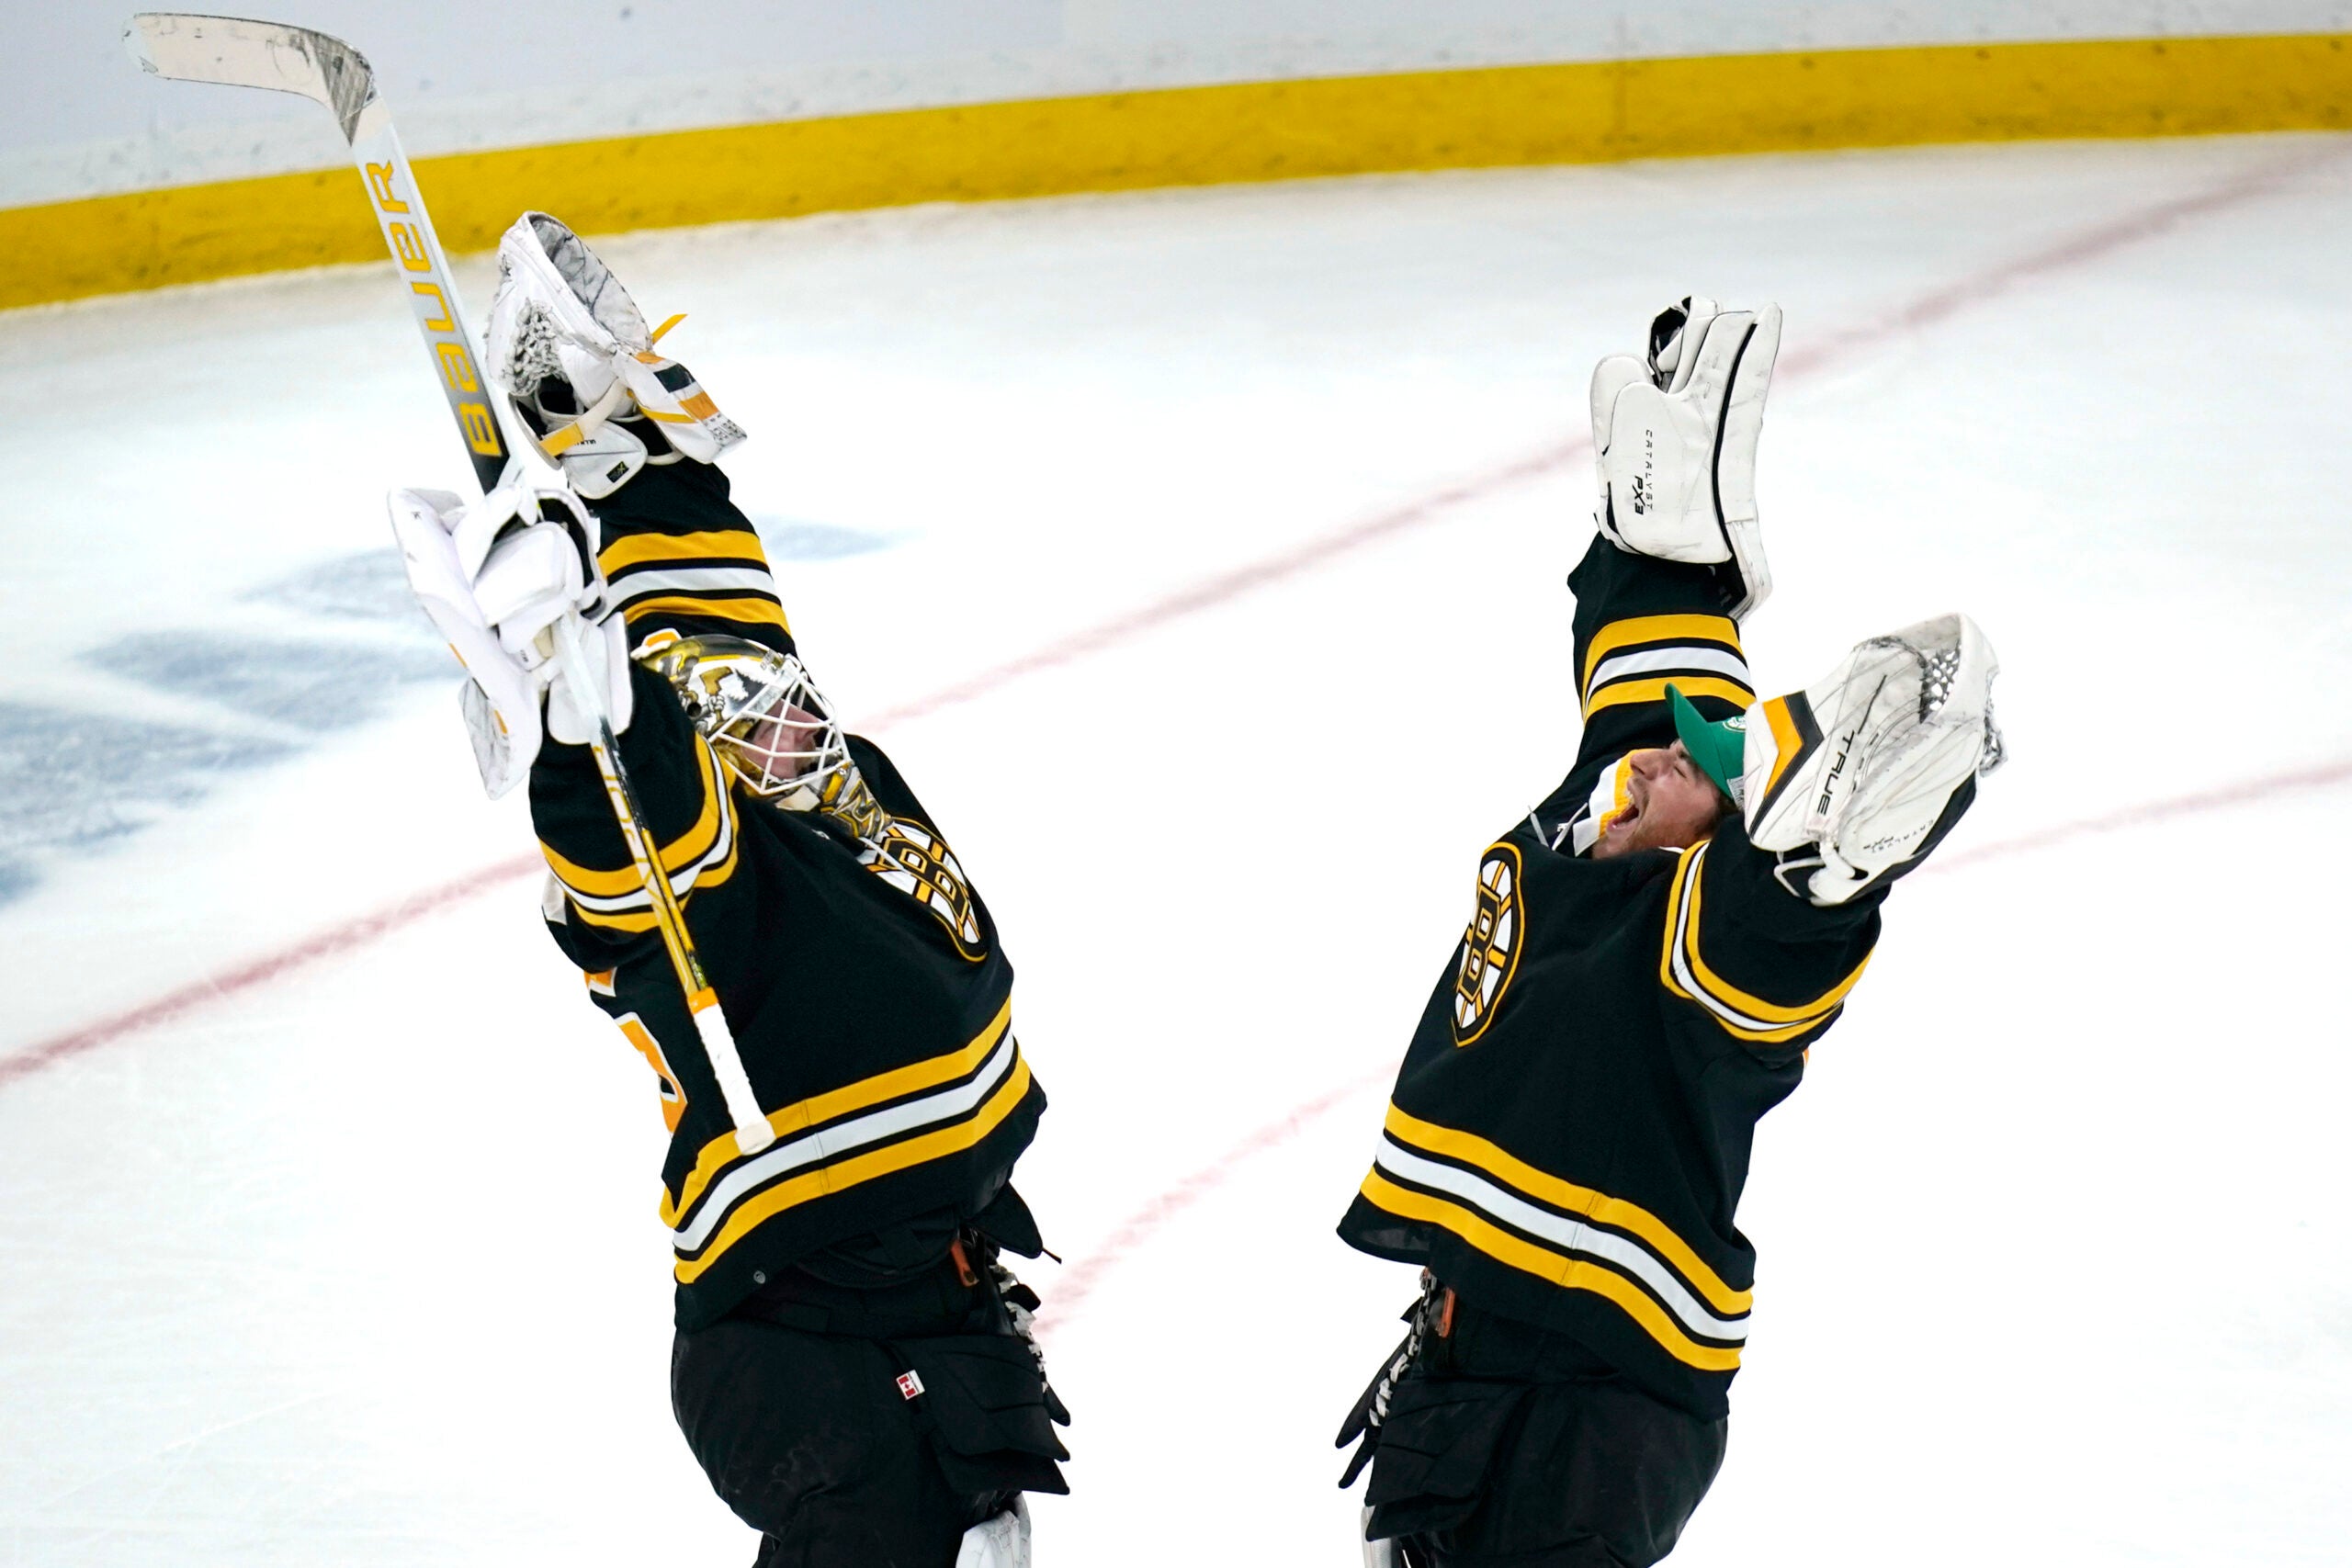 Boston Bruins goaltender Linus Ullmark, left, celebrates with Jeremy Swayman, right, after defeating the Ottawa Senators 2-1 following an NHL hockey game, Tuesday, March 21, 2023, in Boston.